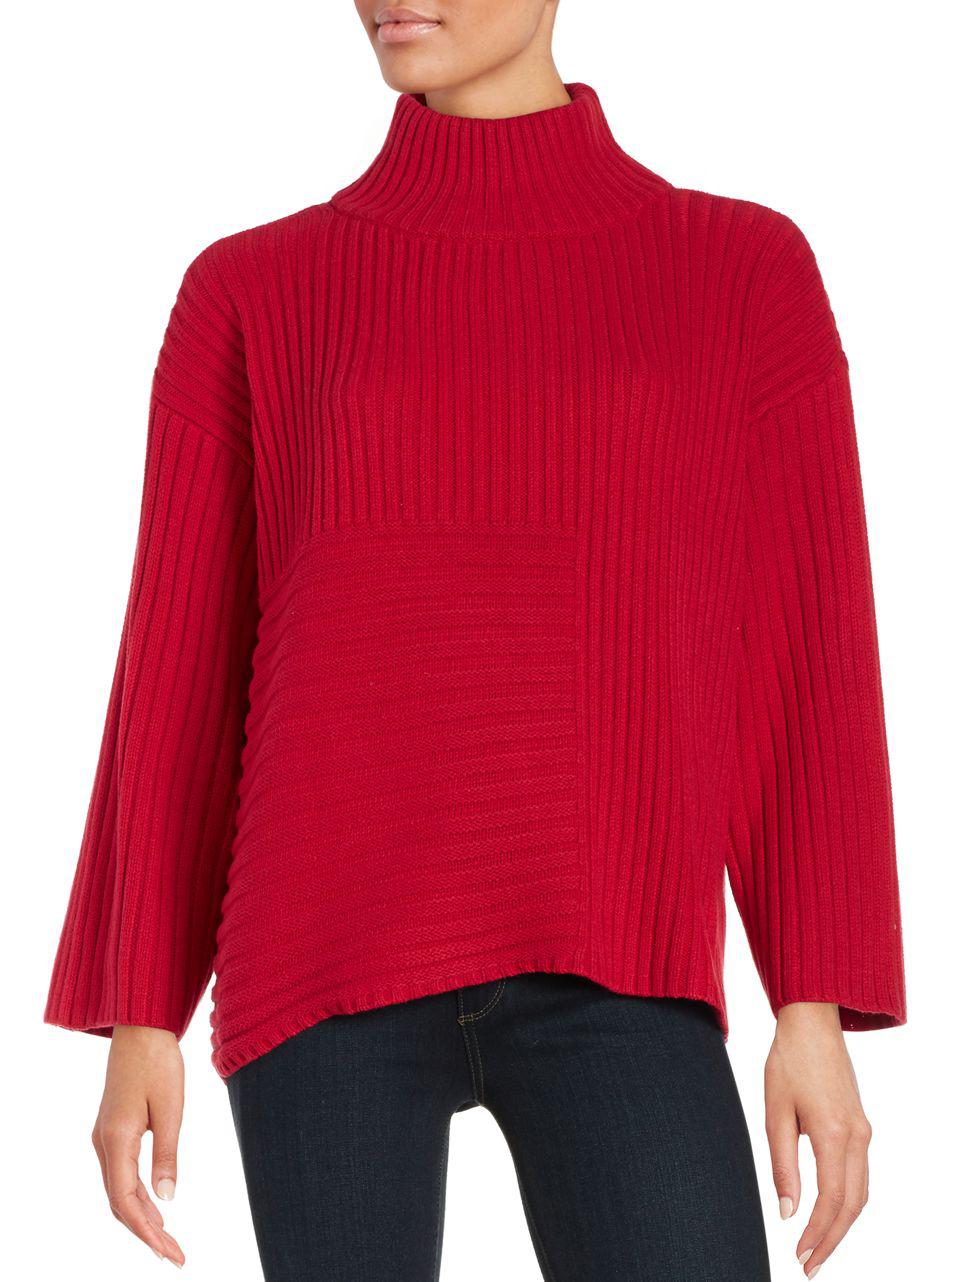 Vince camuto Knit Turtleneck Sweater in Red | Lyst